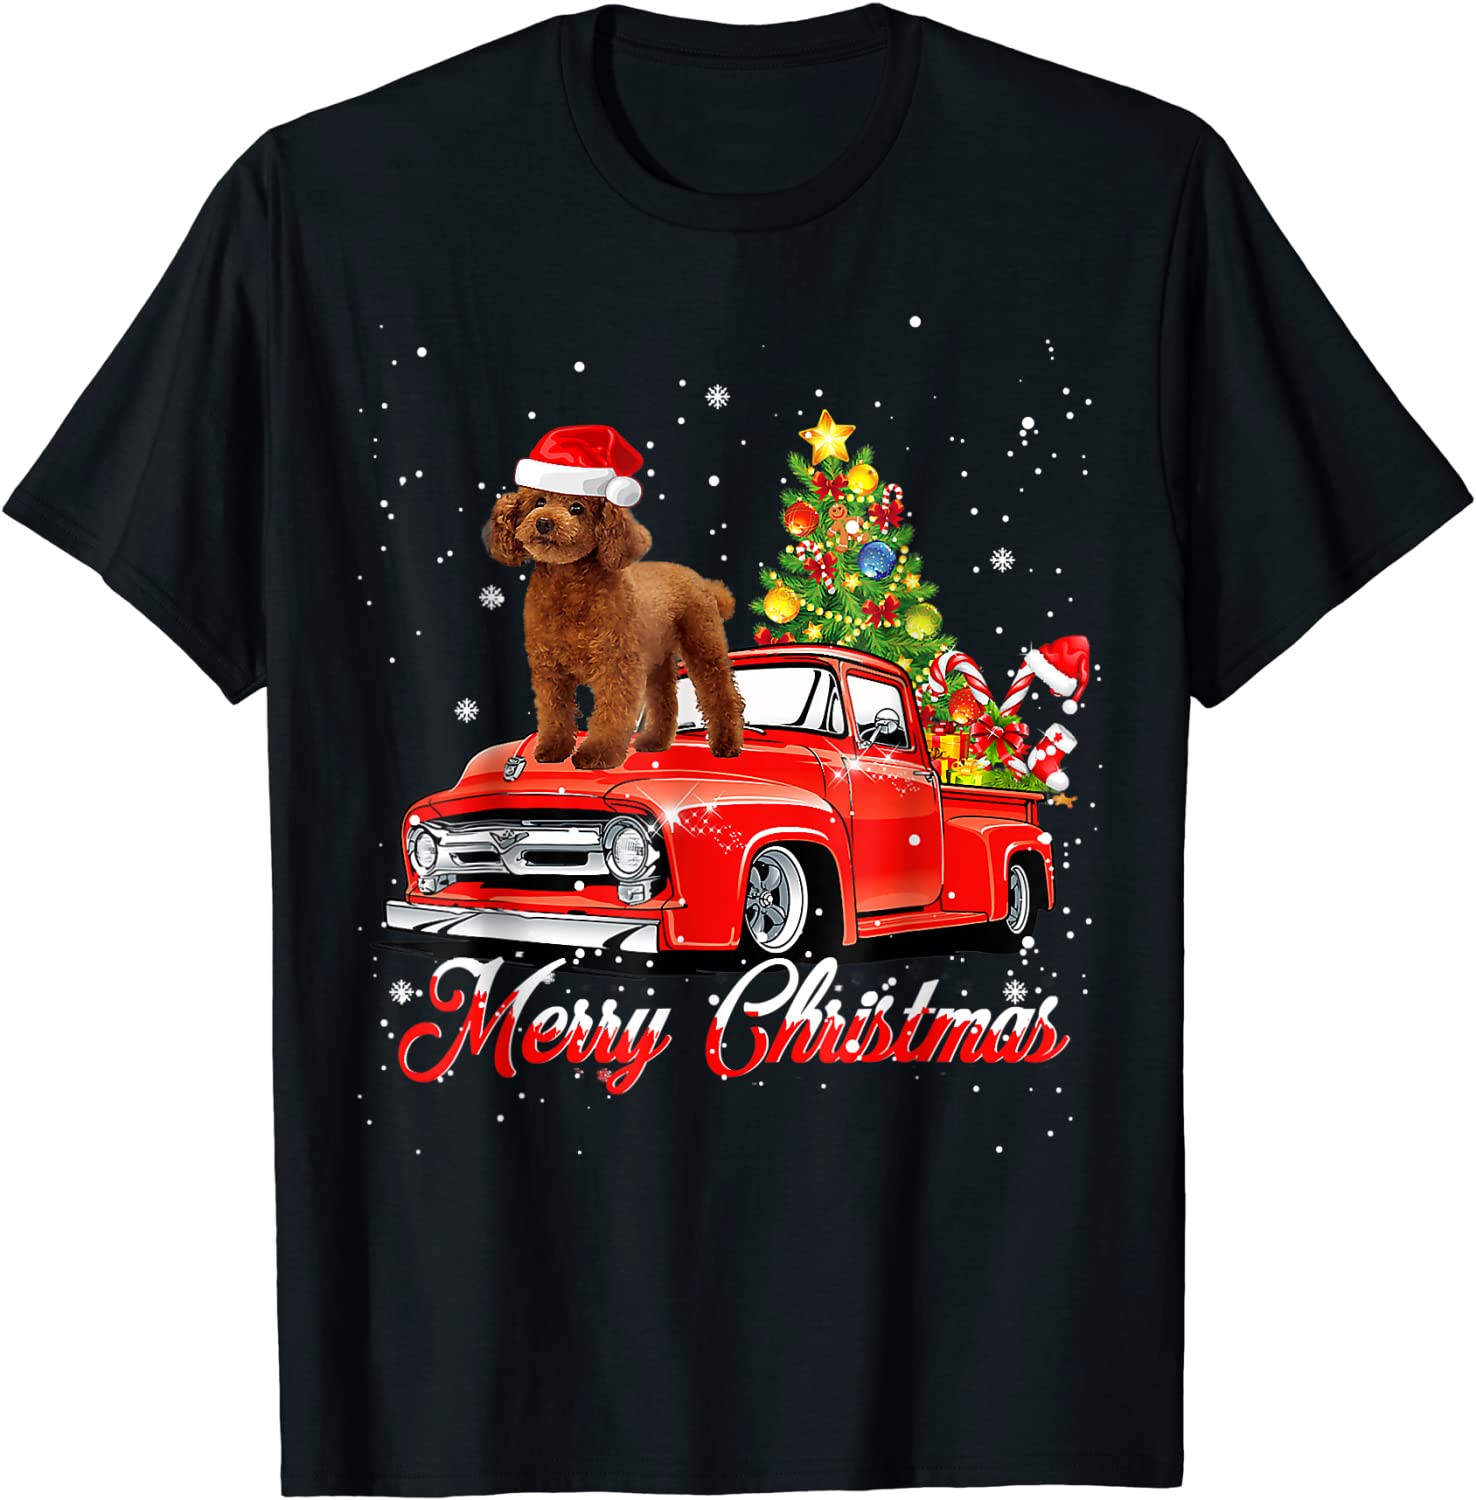 Poodle Dog Riding Red Truck Christmas Decorations Pajama T-Shirt